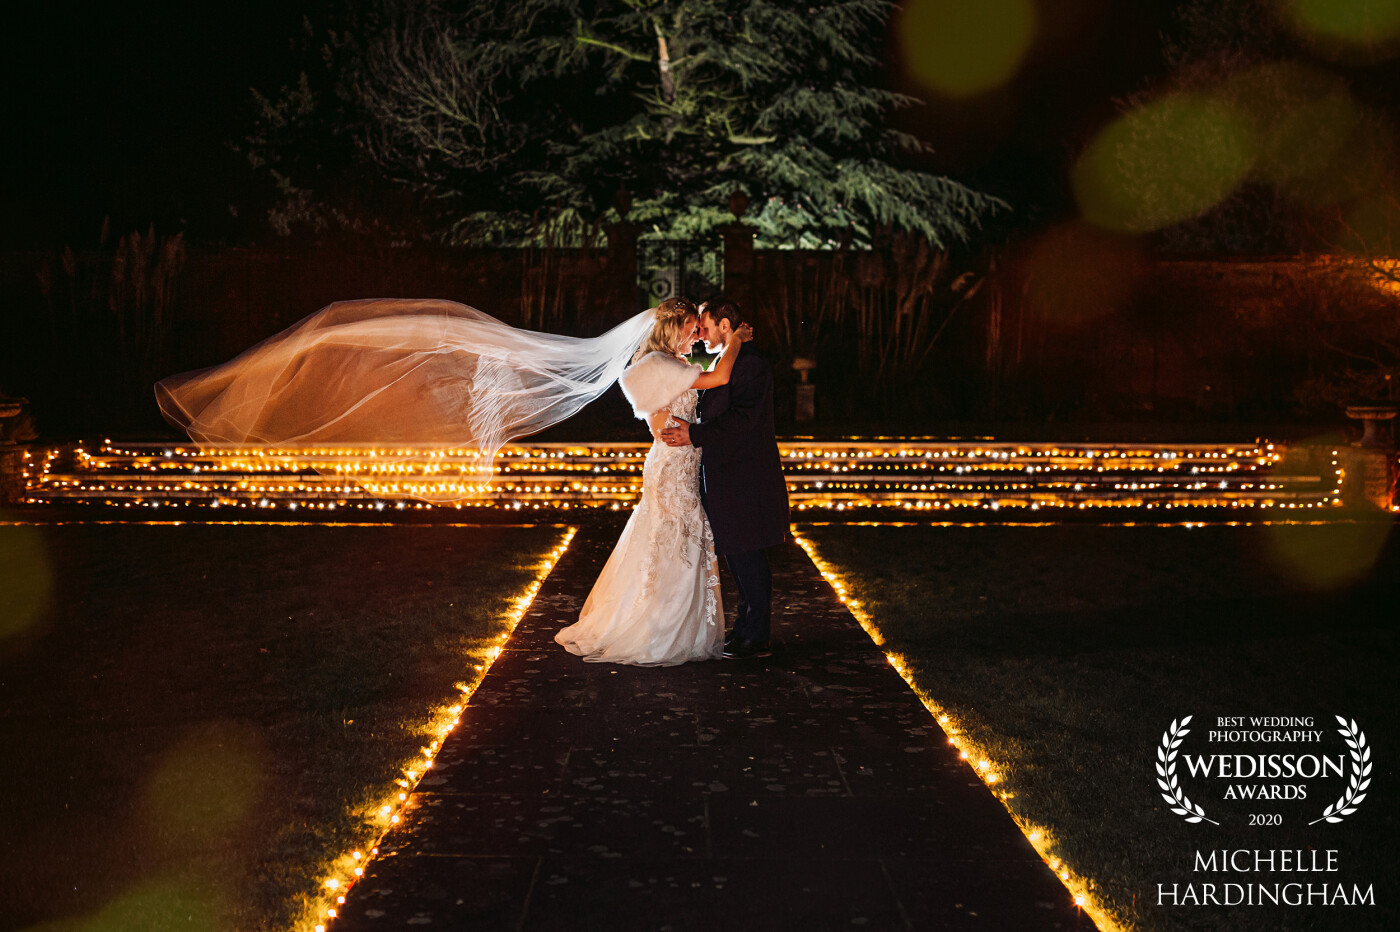 Kirstin and Laurent, my newlywed’s enjoying a moment of togetherness at the stunning Irnham Hall. Letting the light lead to love. 